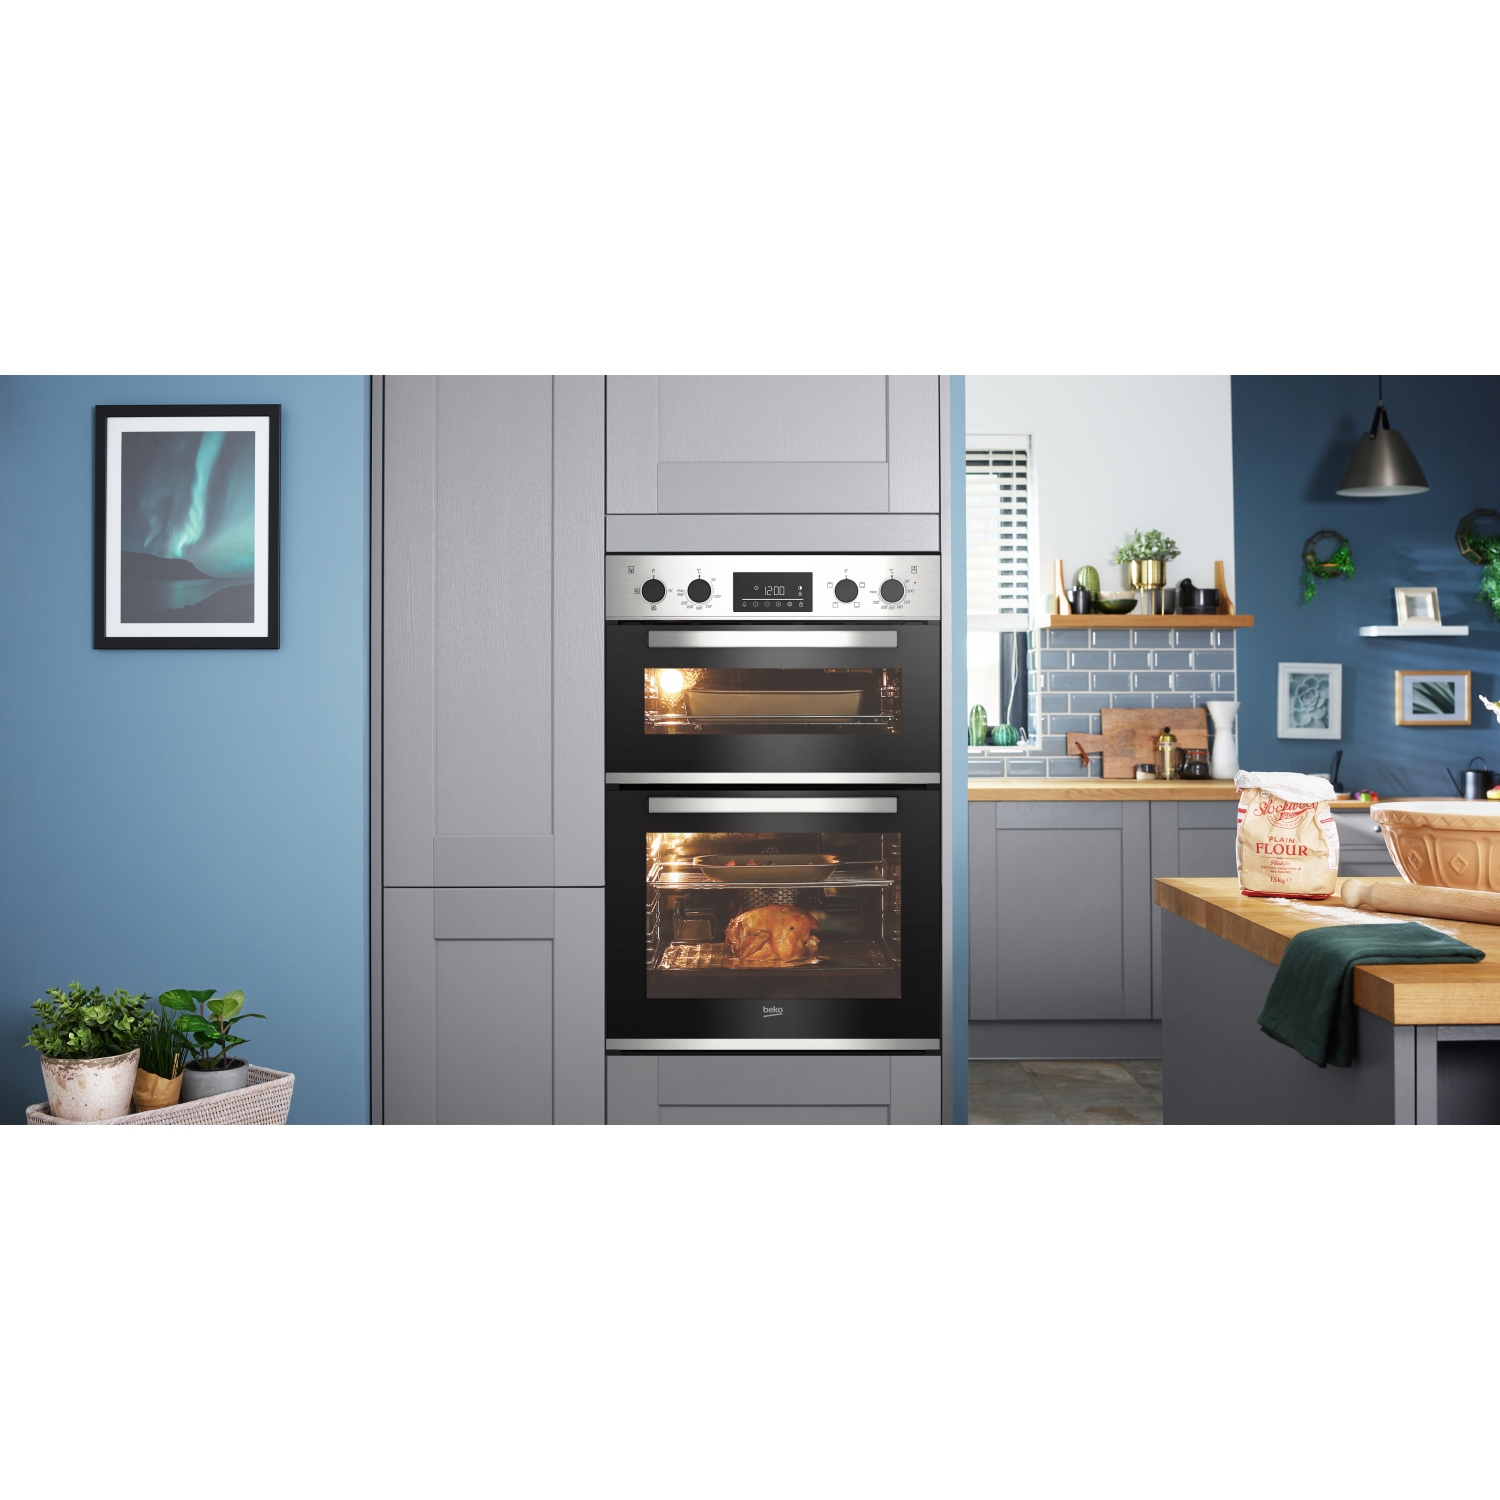 Beko CDFY22309X 60cm Built In High Specification RecycledNet&trade; Double Oven - Stainless Steel - 5